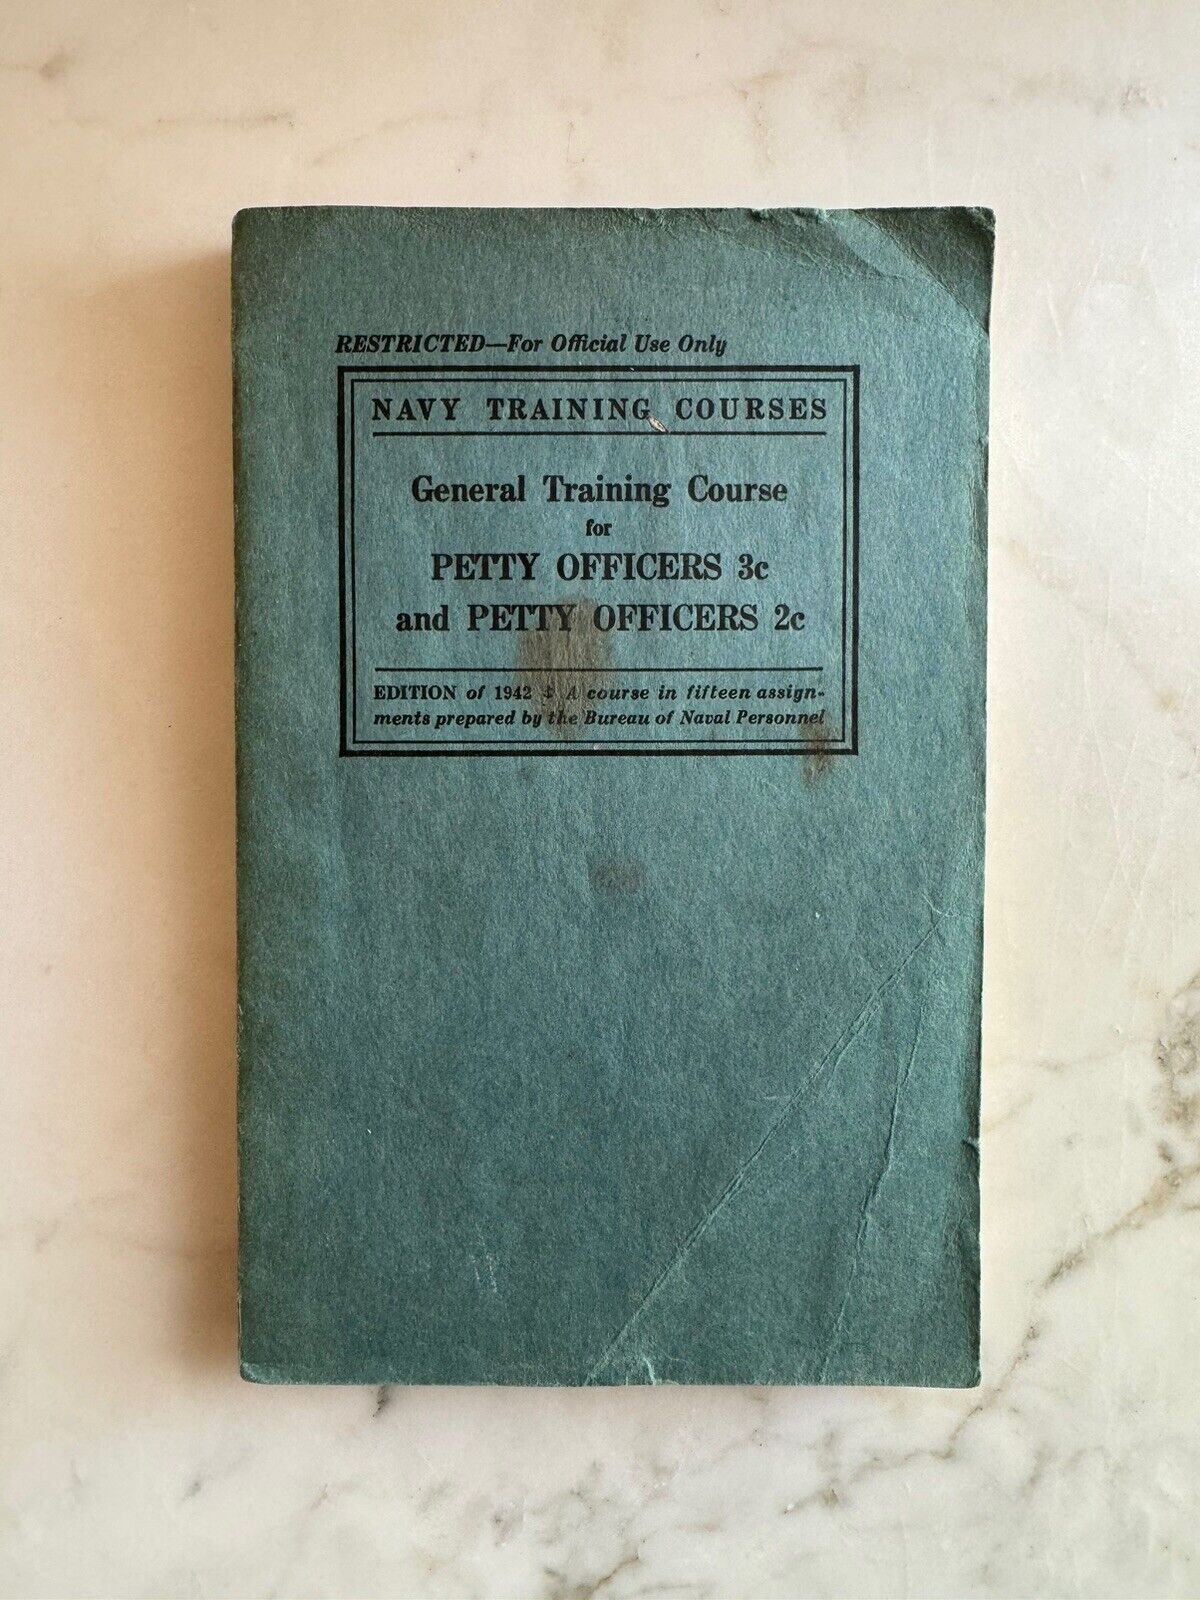 Vintage 1942 WWII Navy Training Course Manual For Petty Officers 3c And 2c